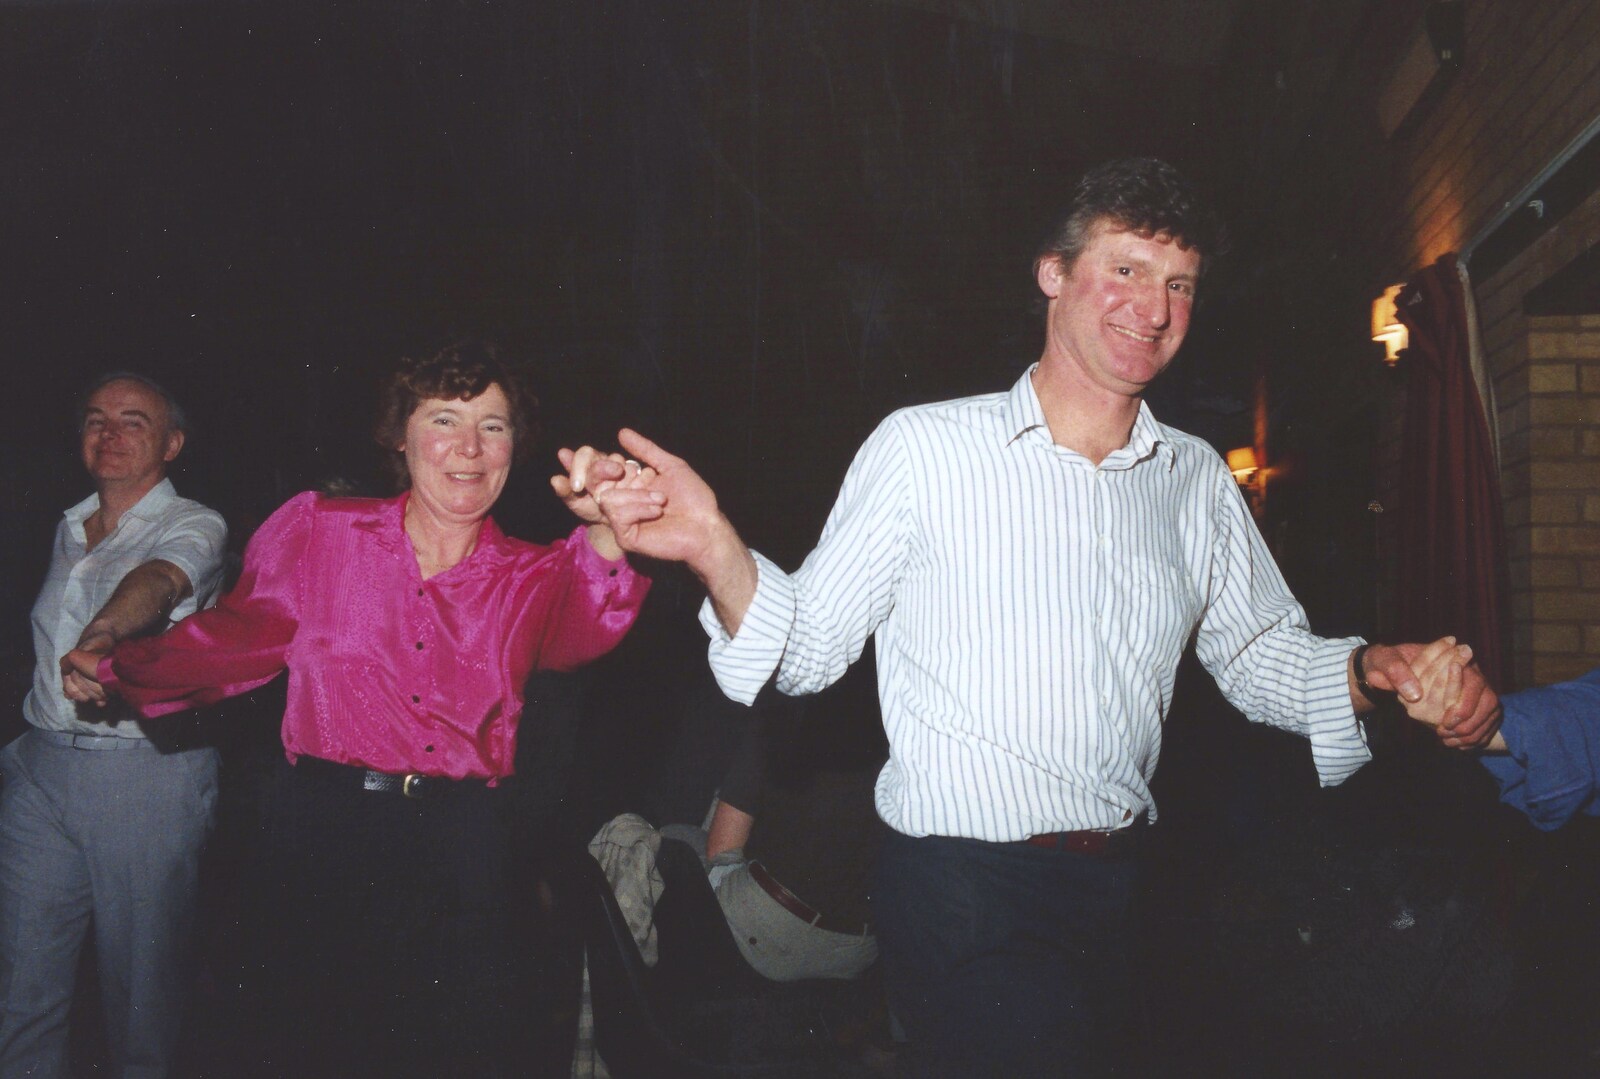 Brenda and Geoff from Bernie and the Porch, The Stables, Stuston, Suffolk - 15th March 1991